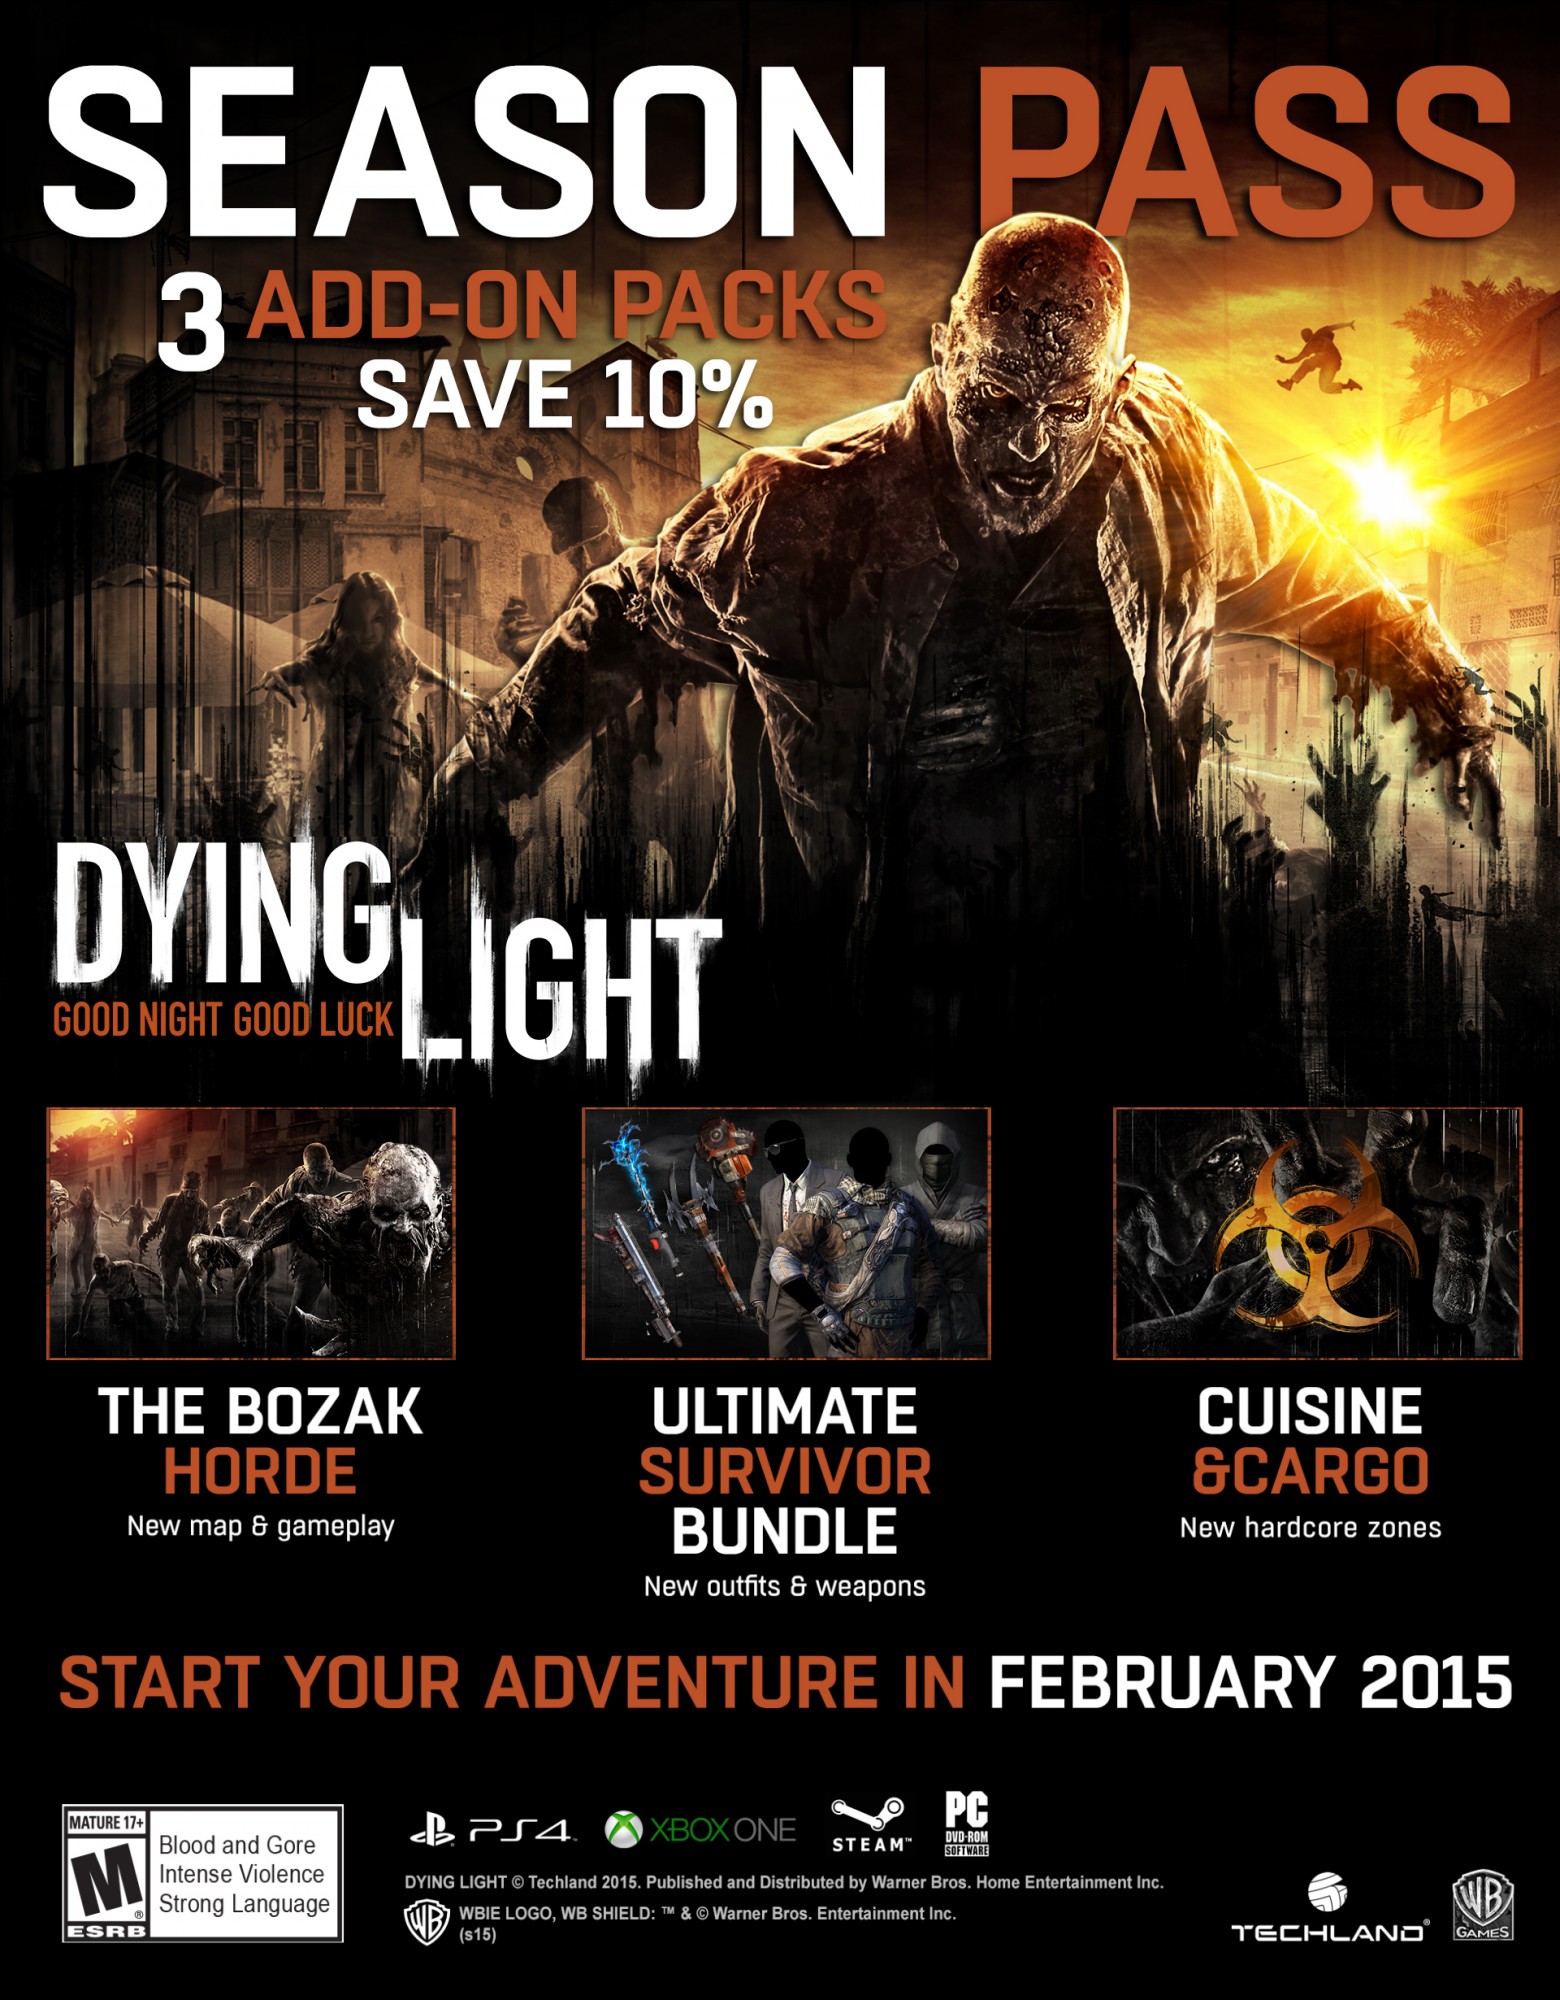 dying light only has one save